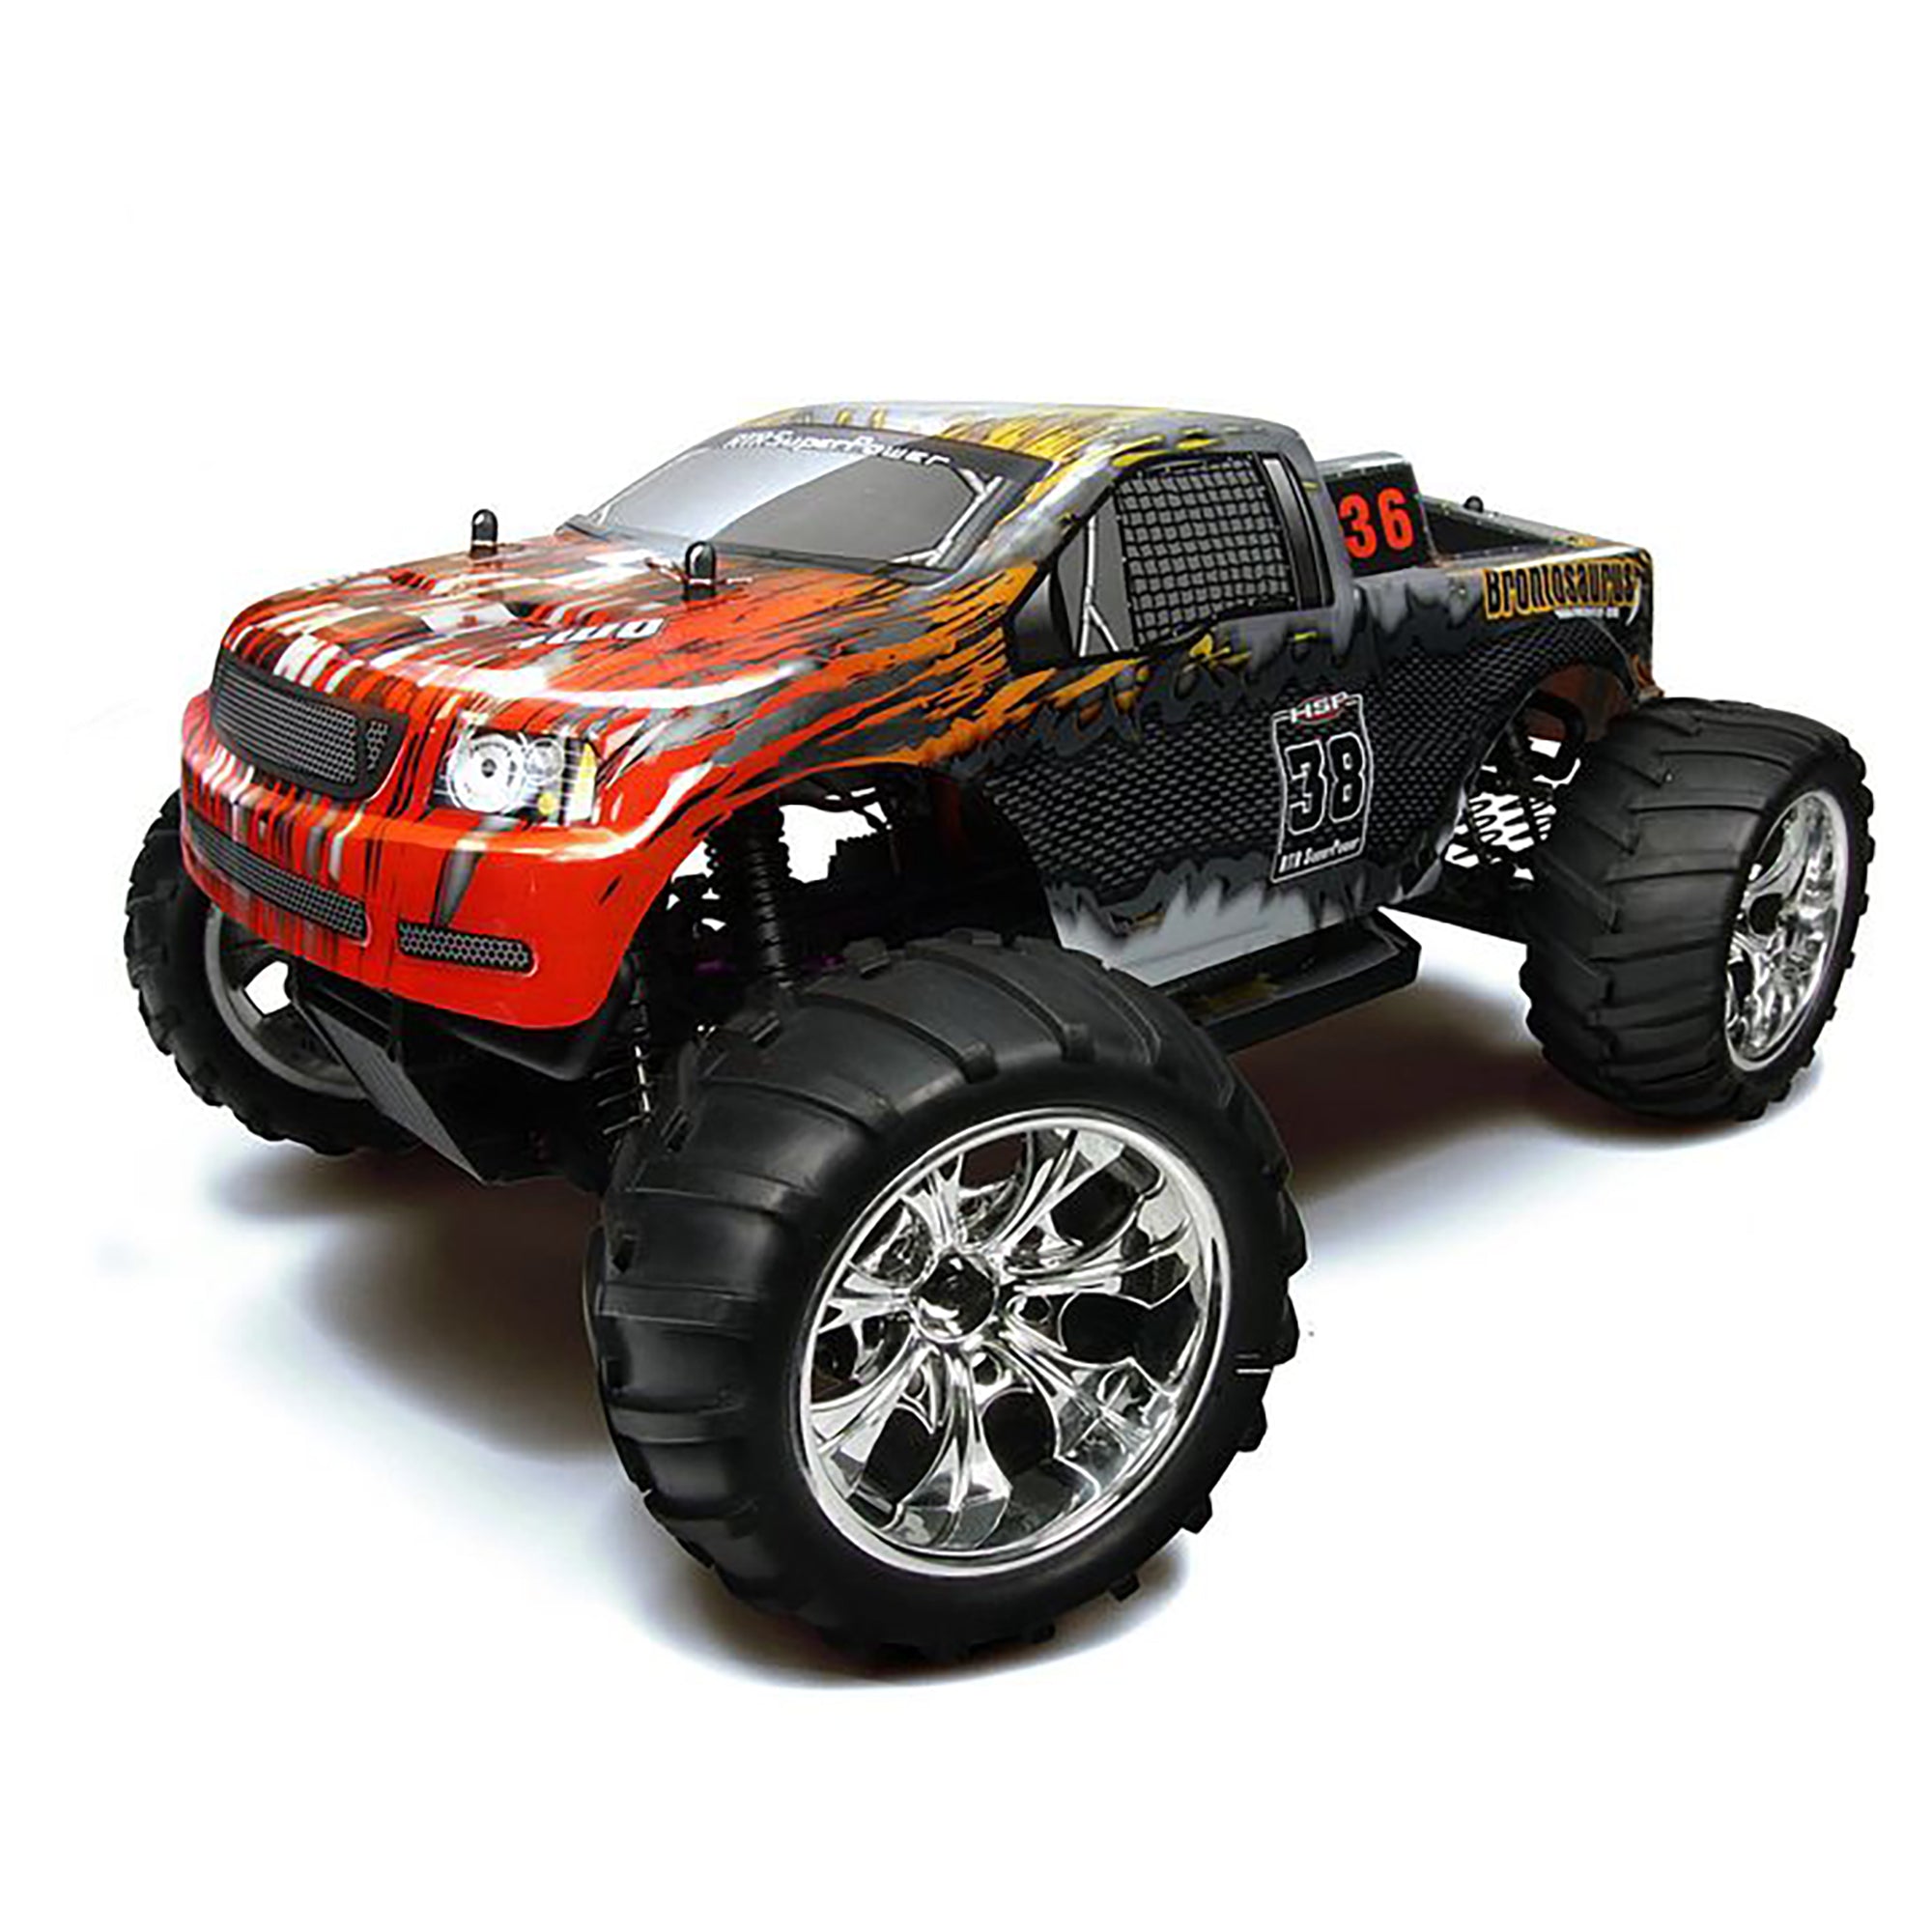 HSP Racing 94108-88043 Black 2.4Ghz Nitro 4WD Off Road 1/10 Scale RC Truck